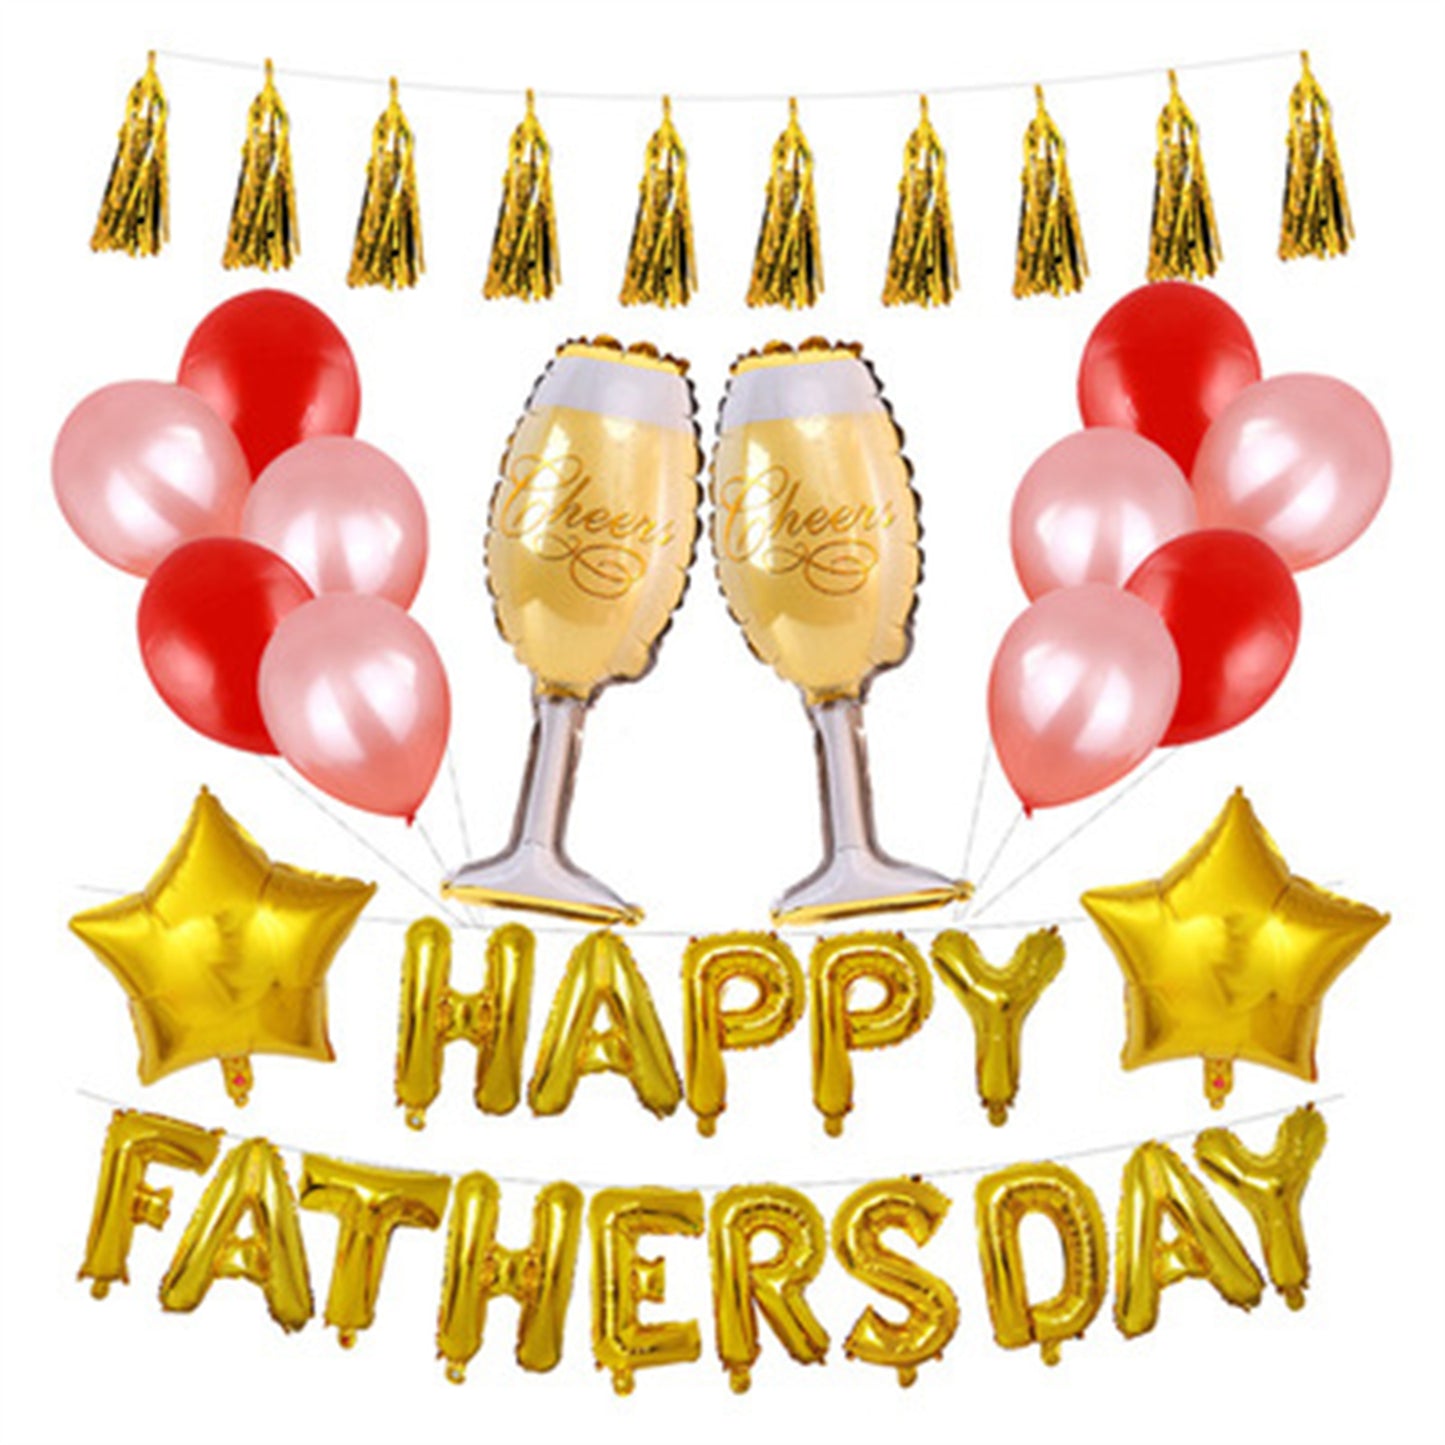 Father's Day decorative balloon 1 6 inch happyfathersday bright gold letter balloon custom balloon